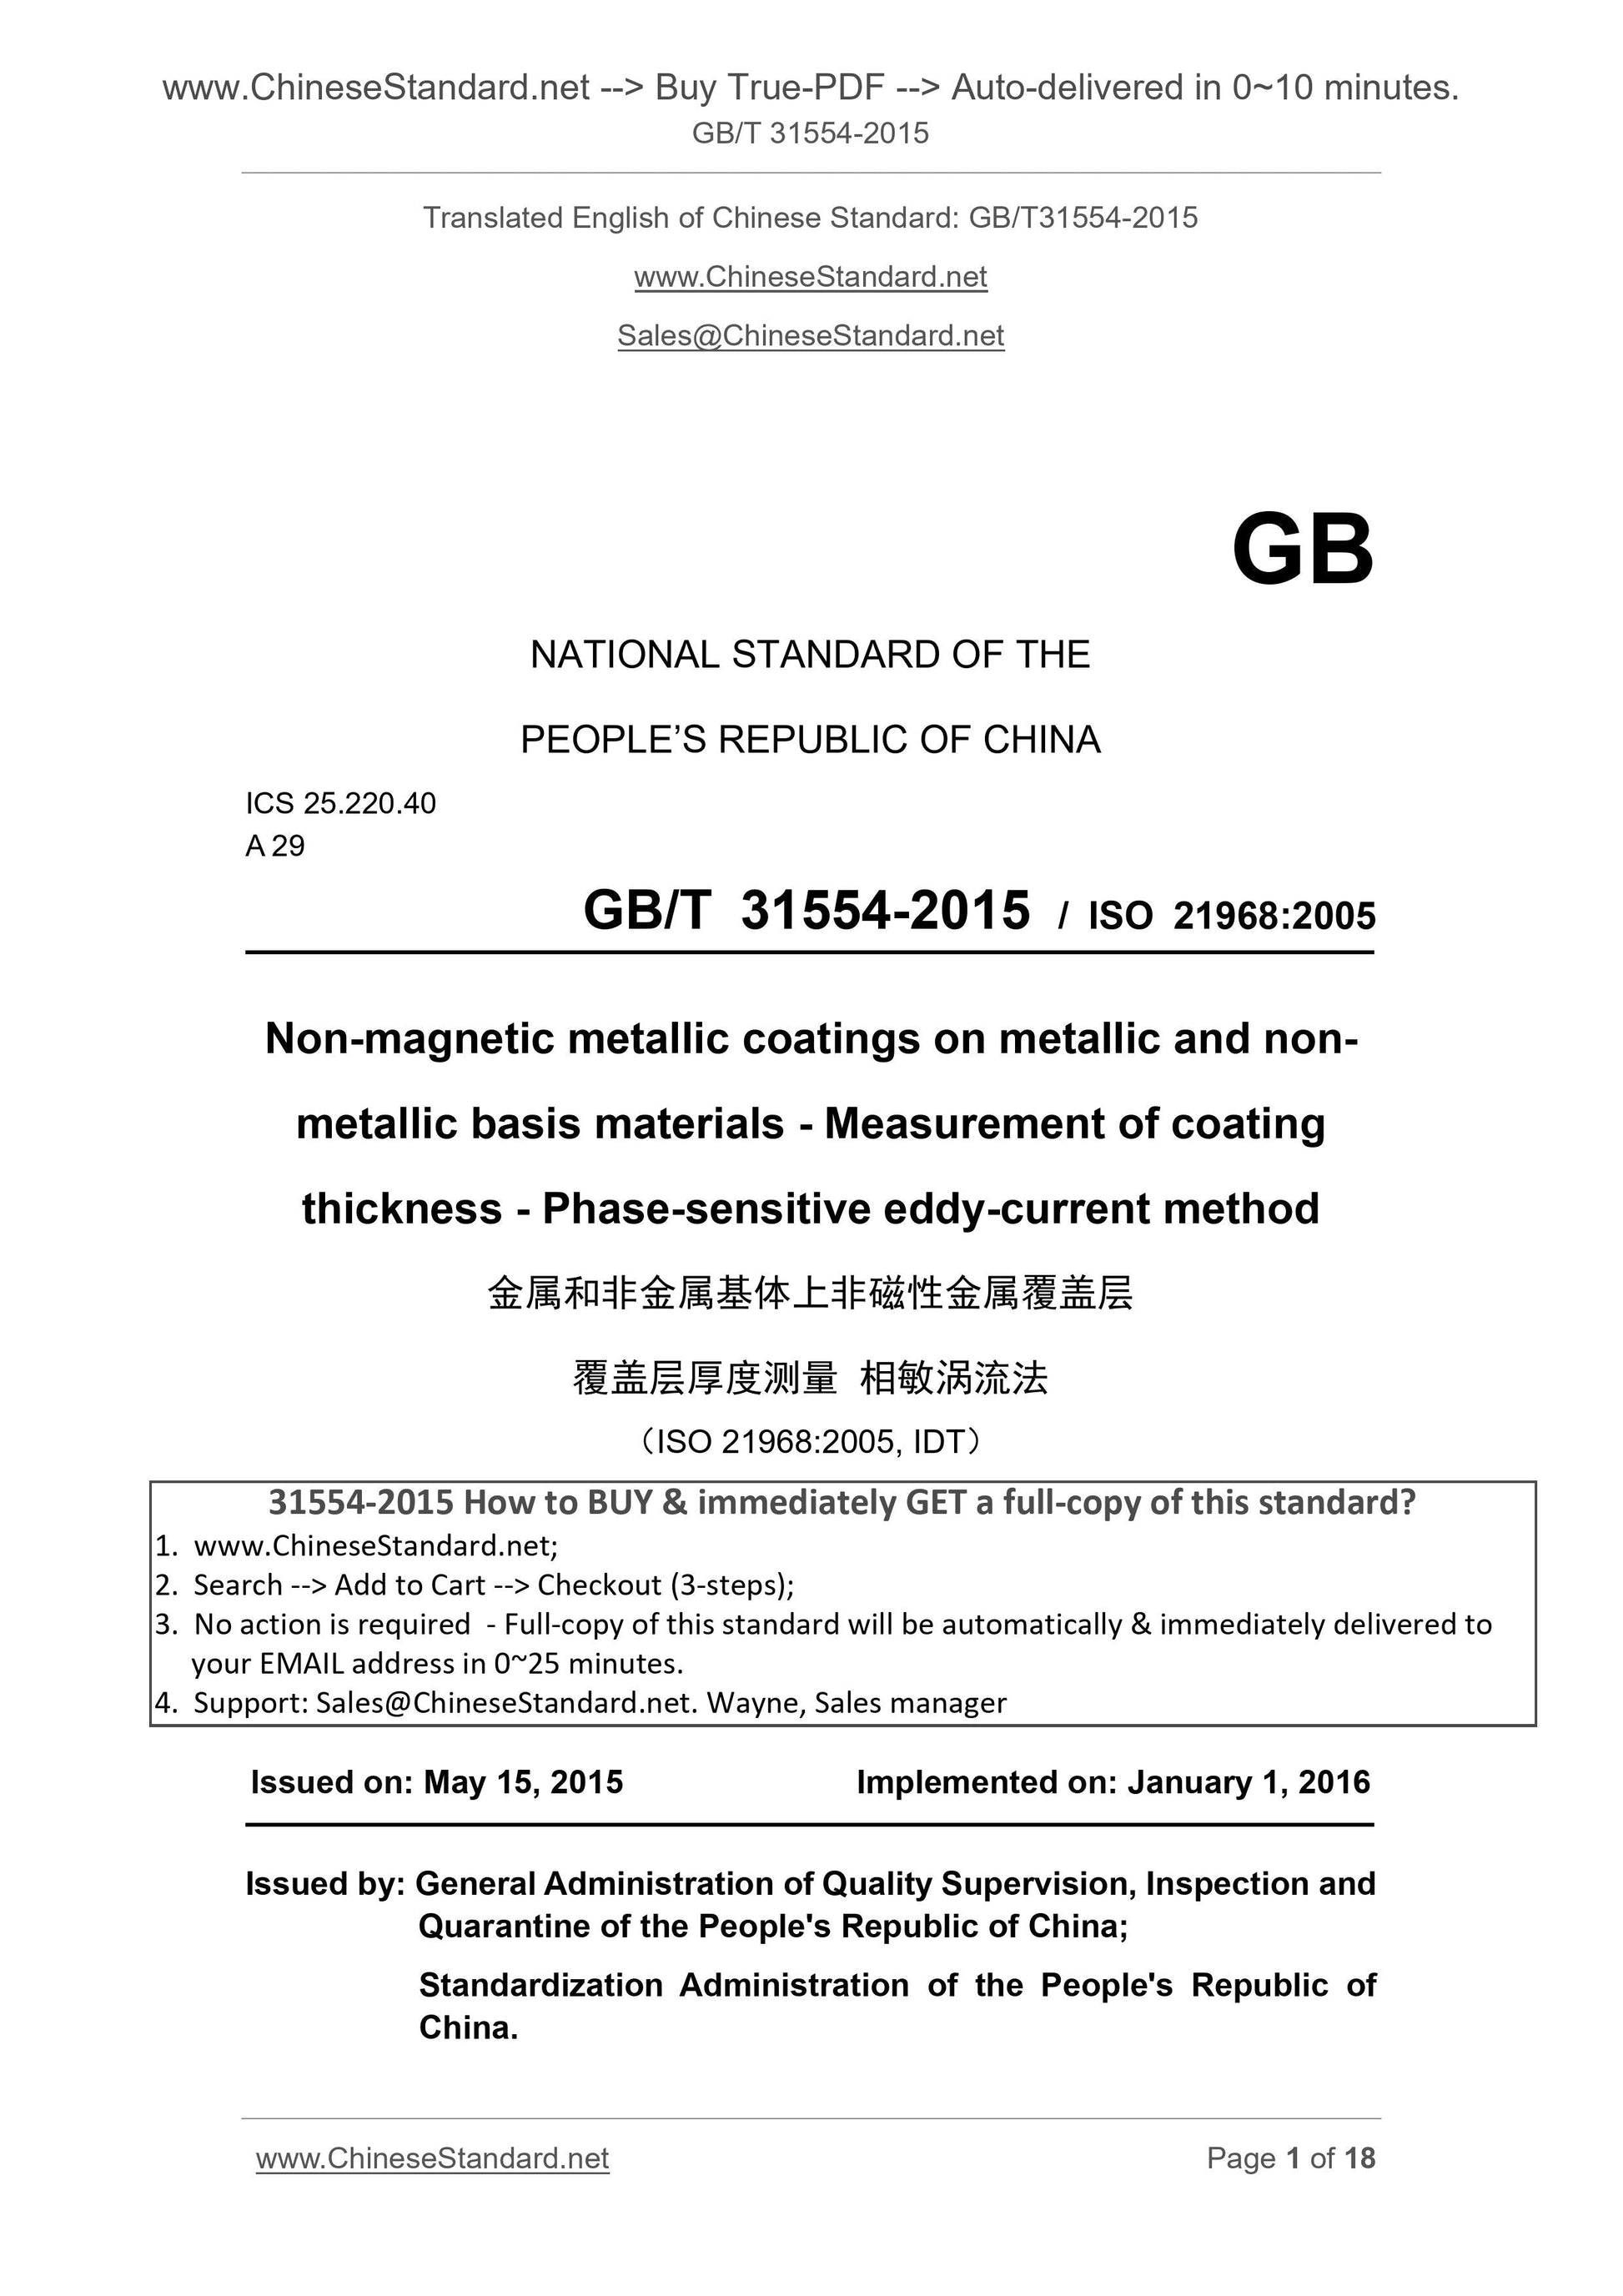 GB/T 31554-2015 Page 1